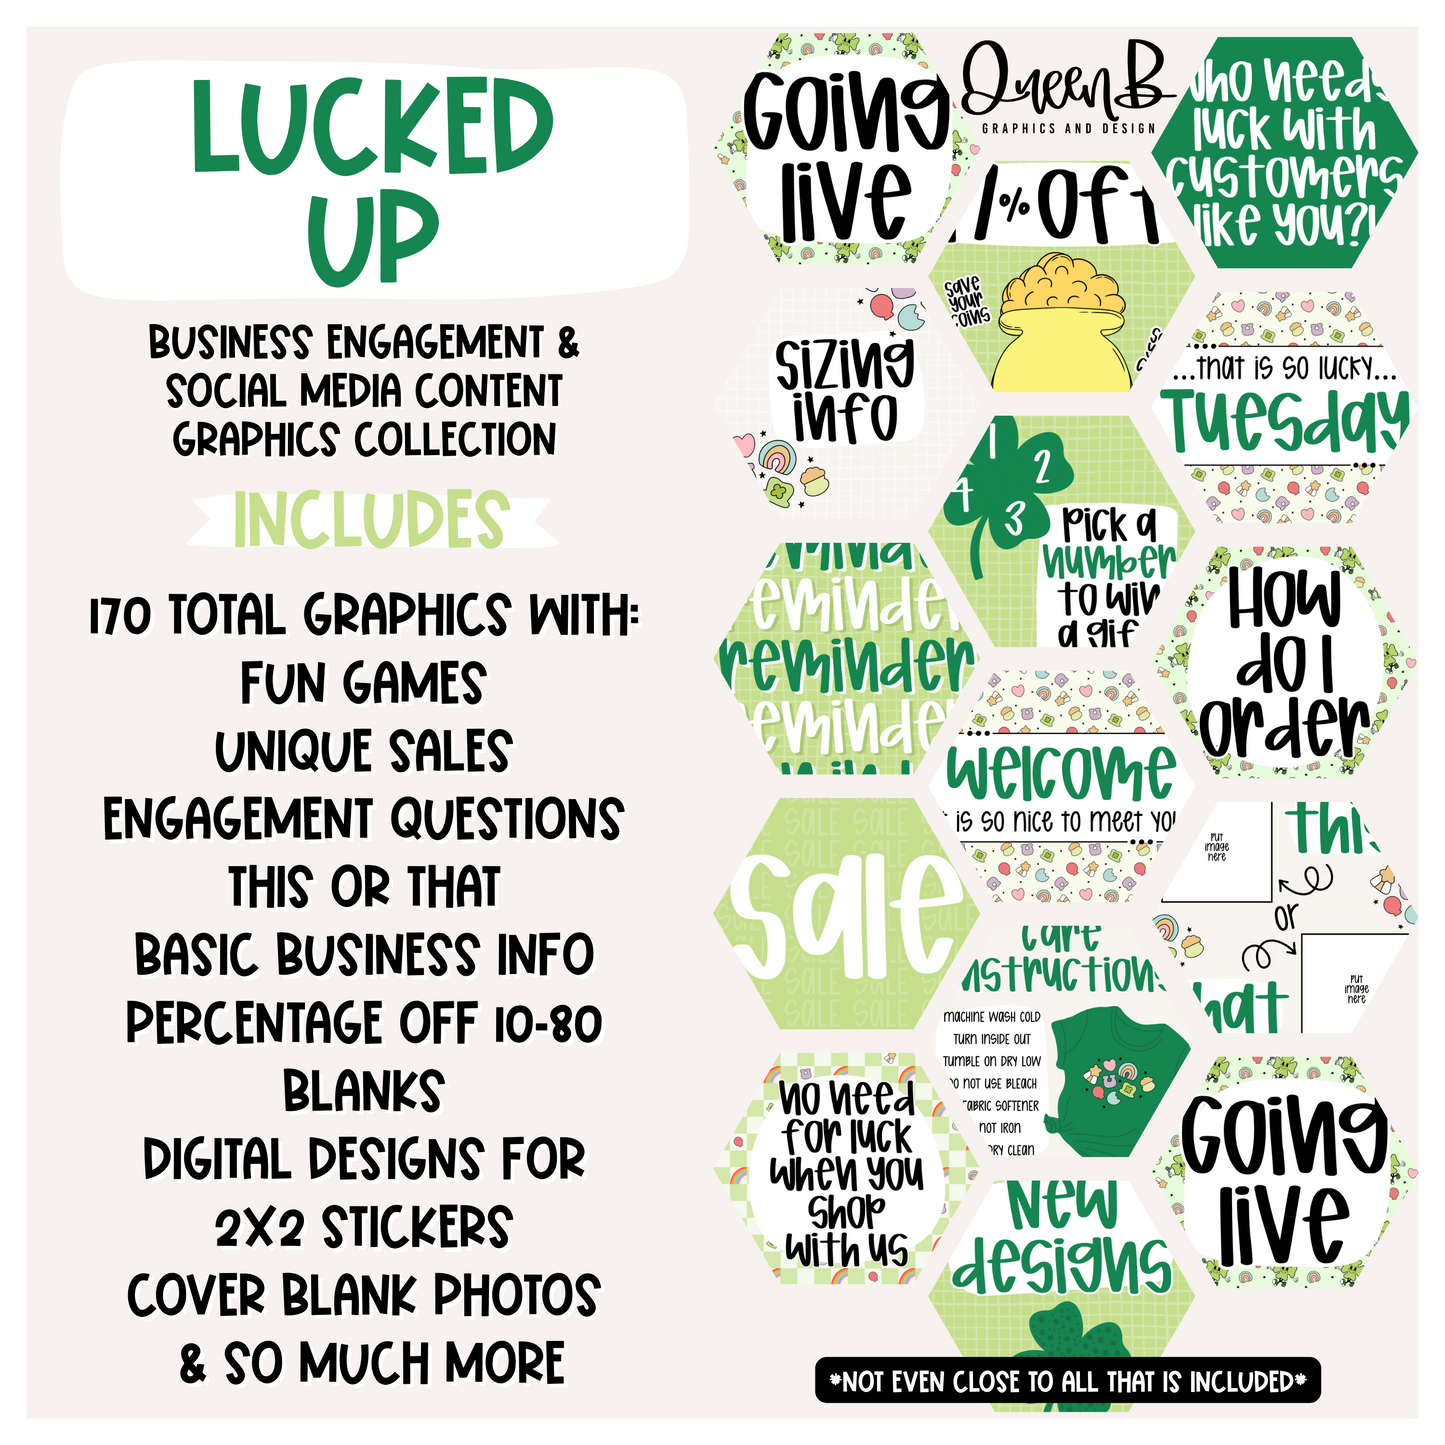 Lucked Up Business Engagement & Social Media Content Graphics Collection